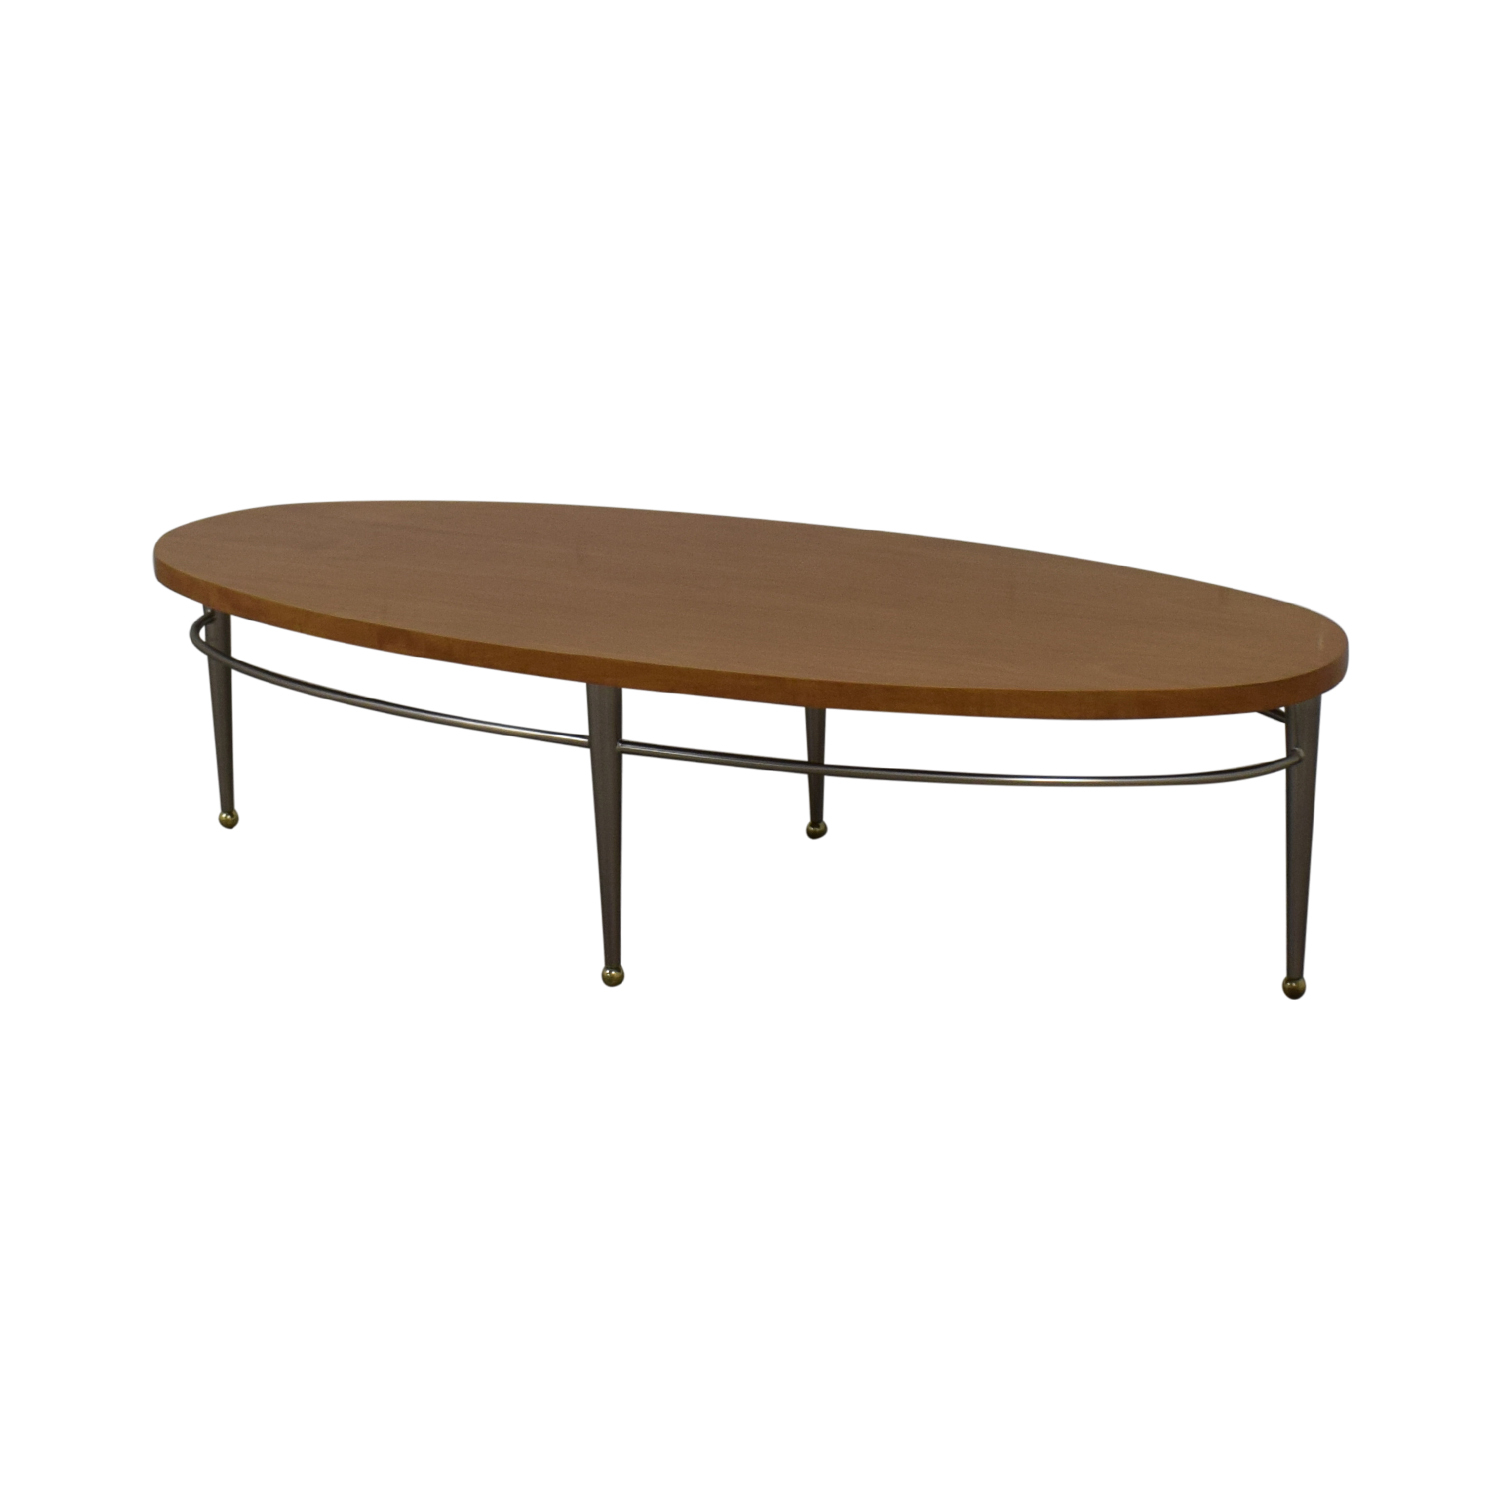 75 Off Ethan Allen Ethan Allen Round Wood Coffee Table Tables pertaining to dimensions 1500 X 1500